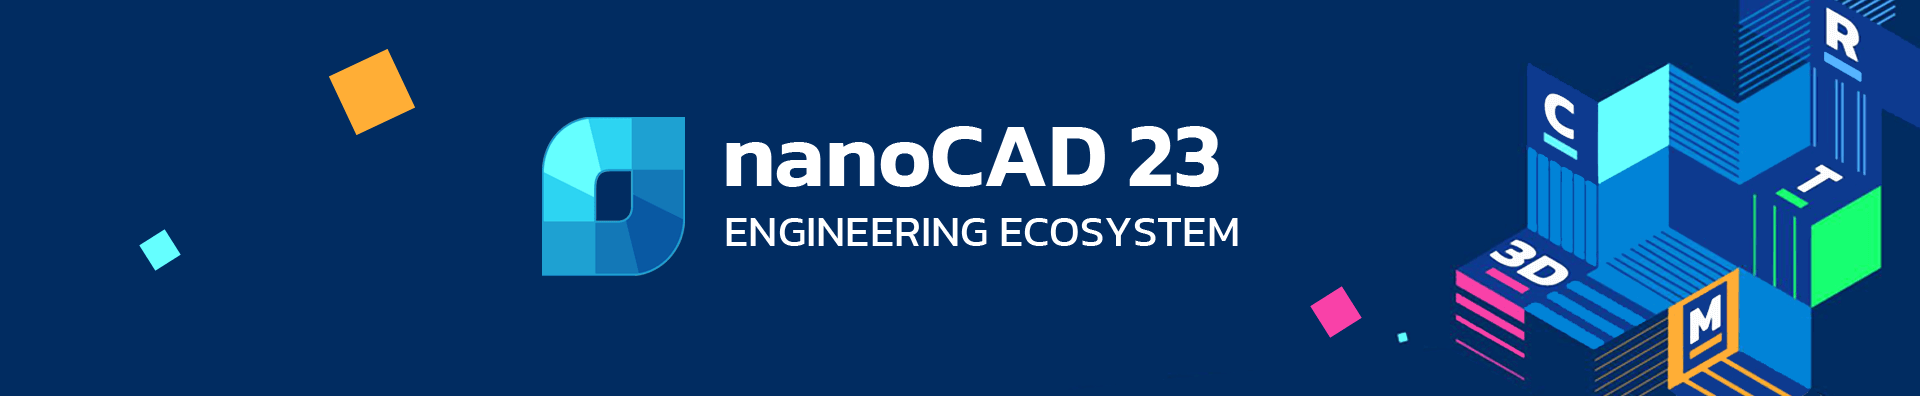 nanoCAD - The best engineering CAD solution for professionals